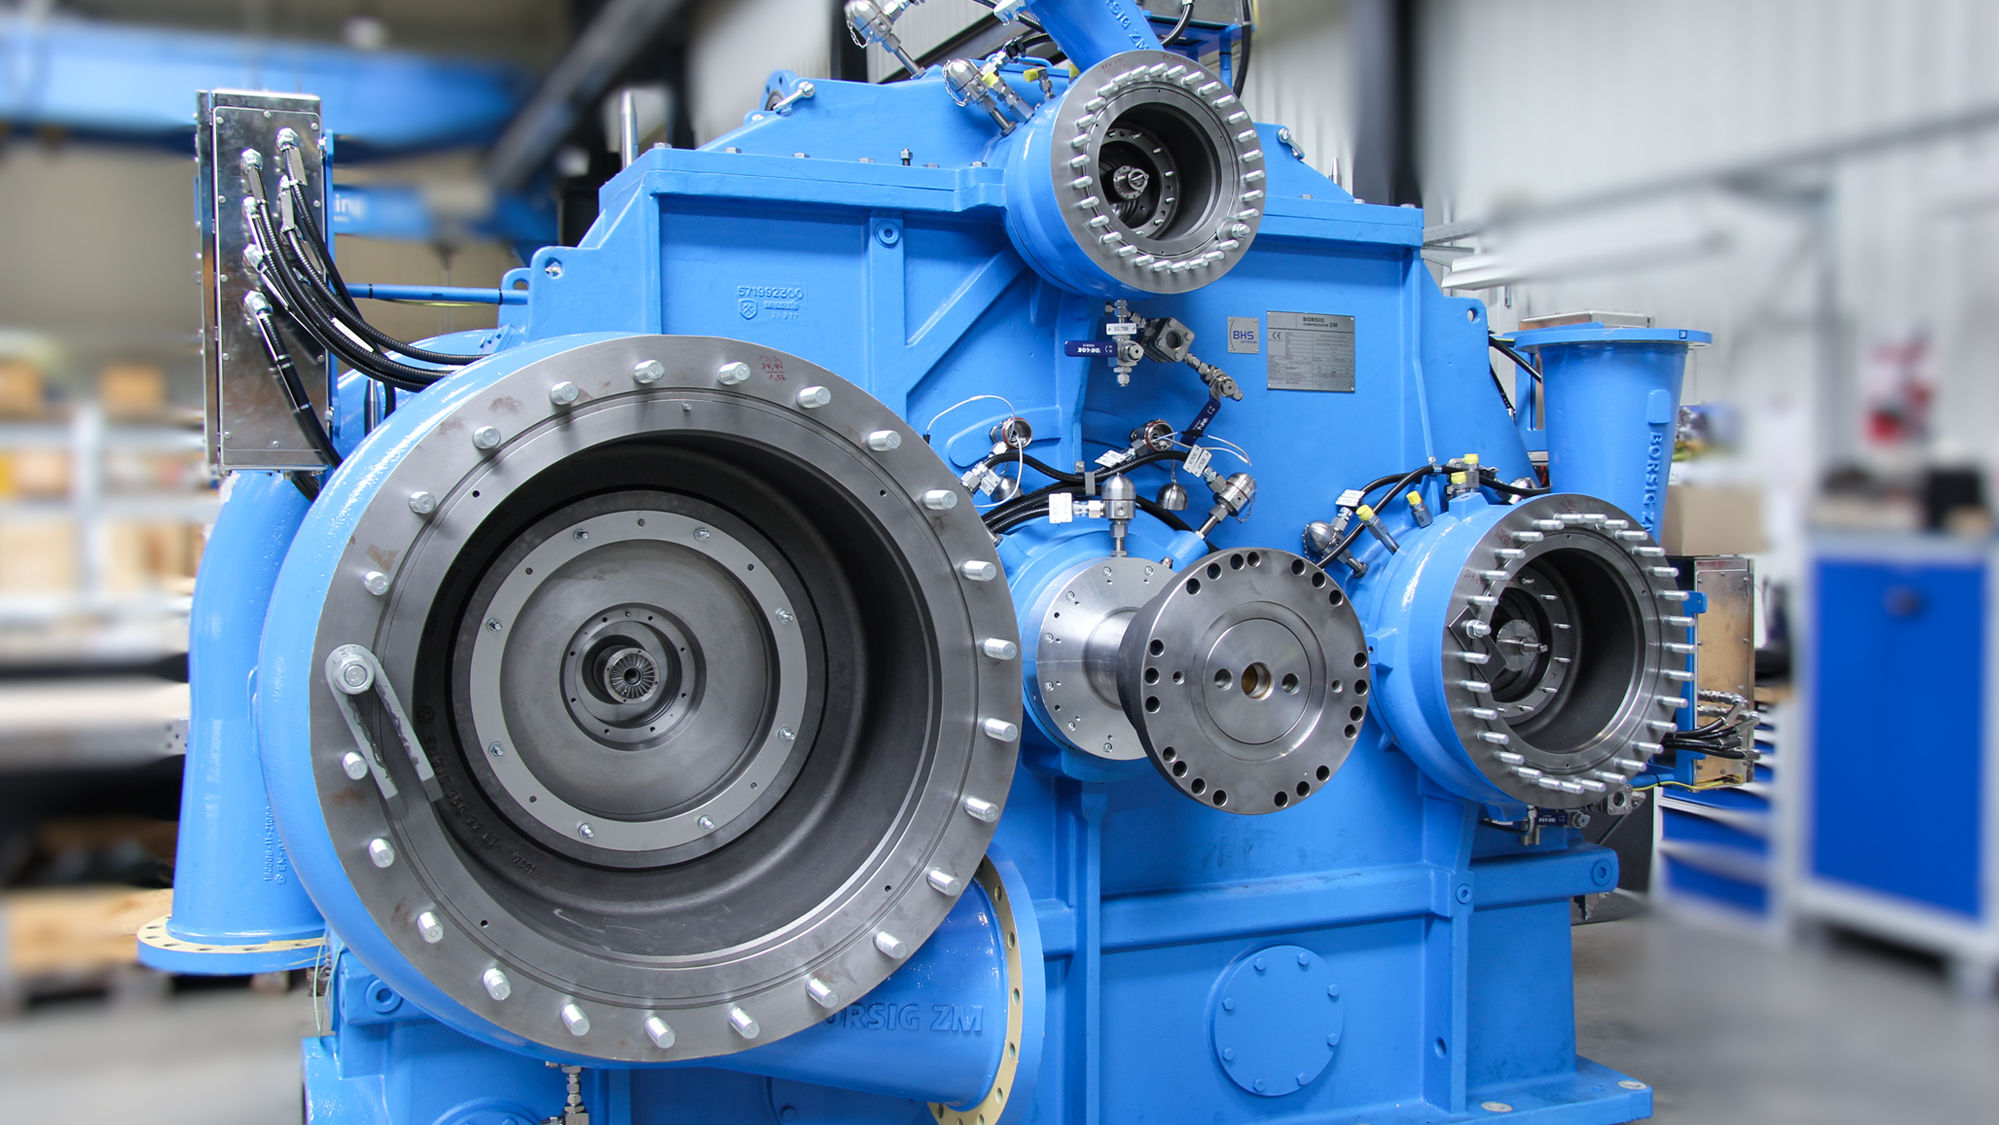 Shown is a blue integrally geared centrifugal compressor during assembly at BZM before installation of the impellers.